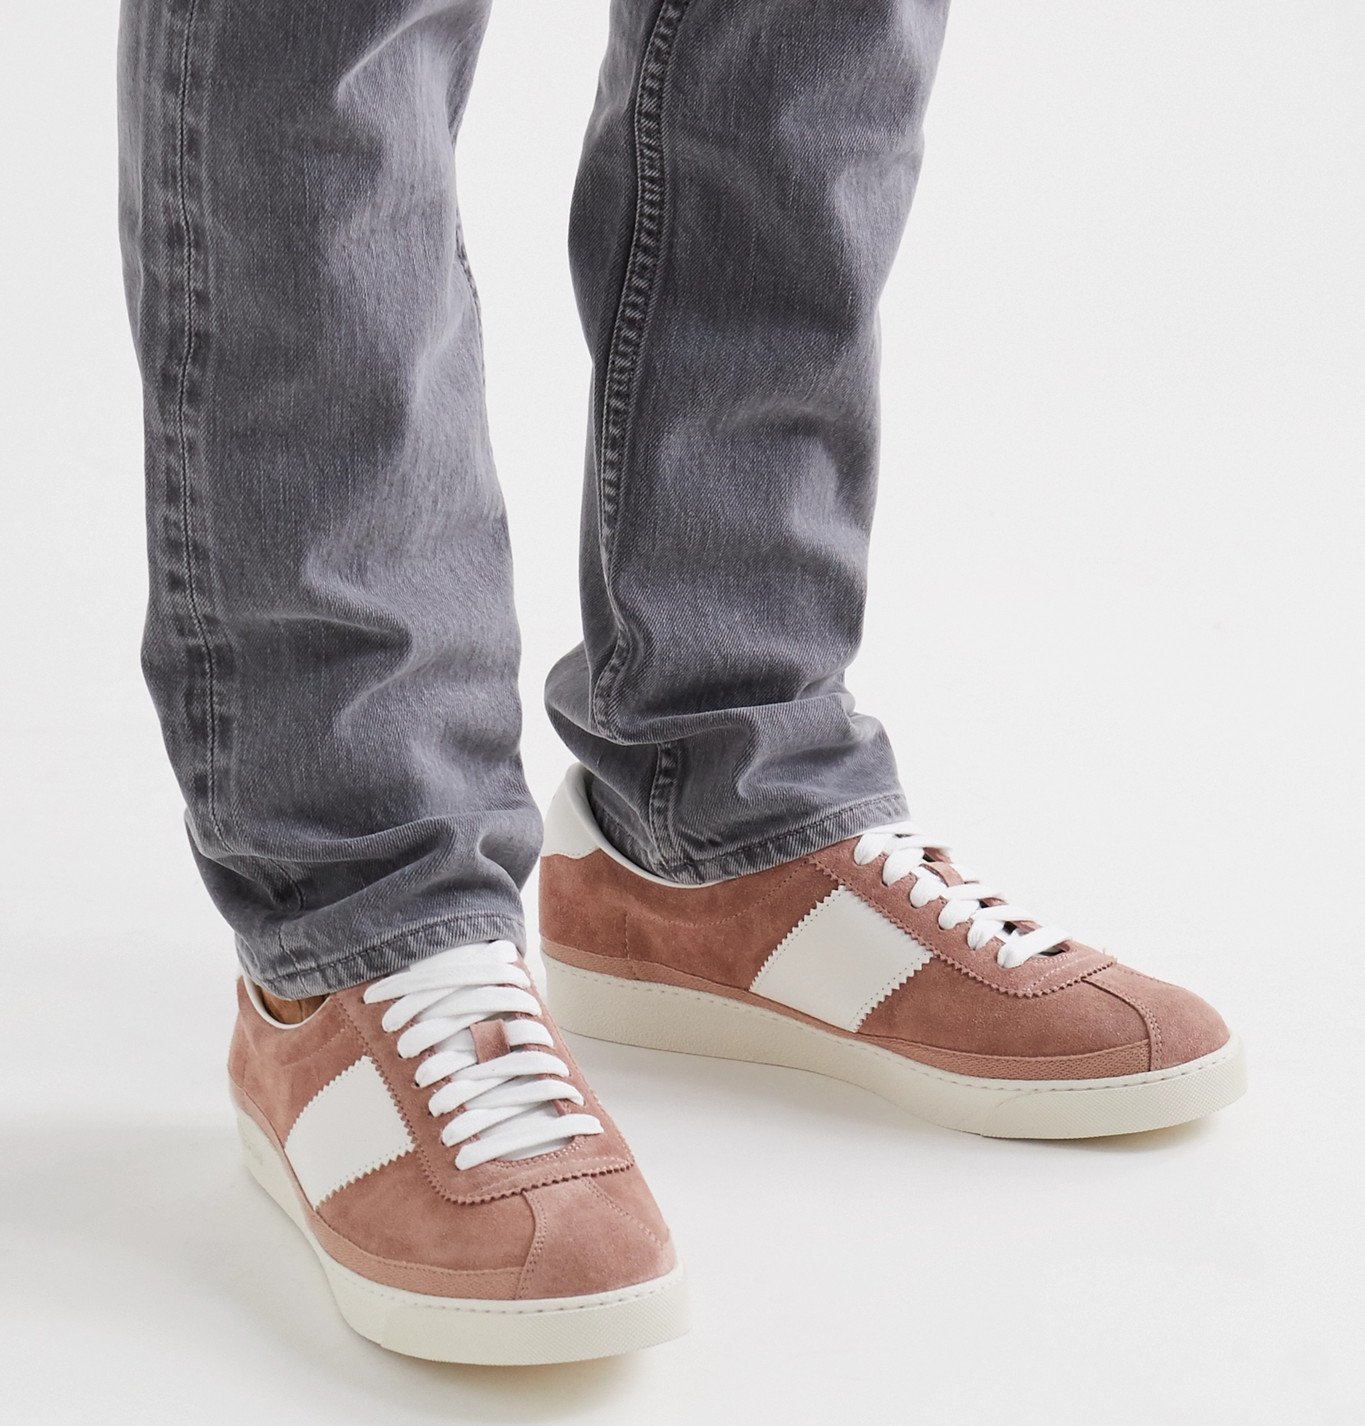 TOM FORD - Bannister Leather-Trimmed Suede Sneakers - Pink TOM FORD